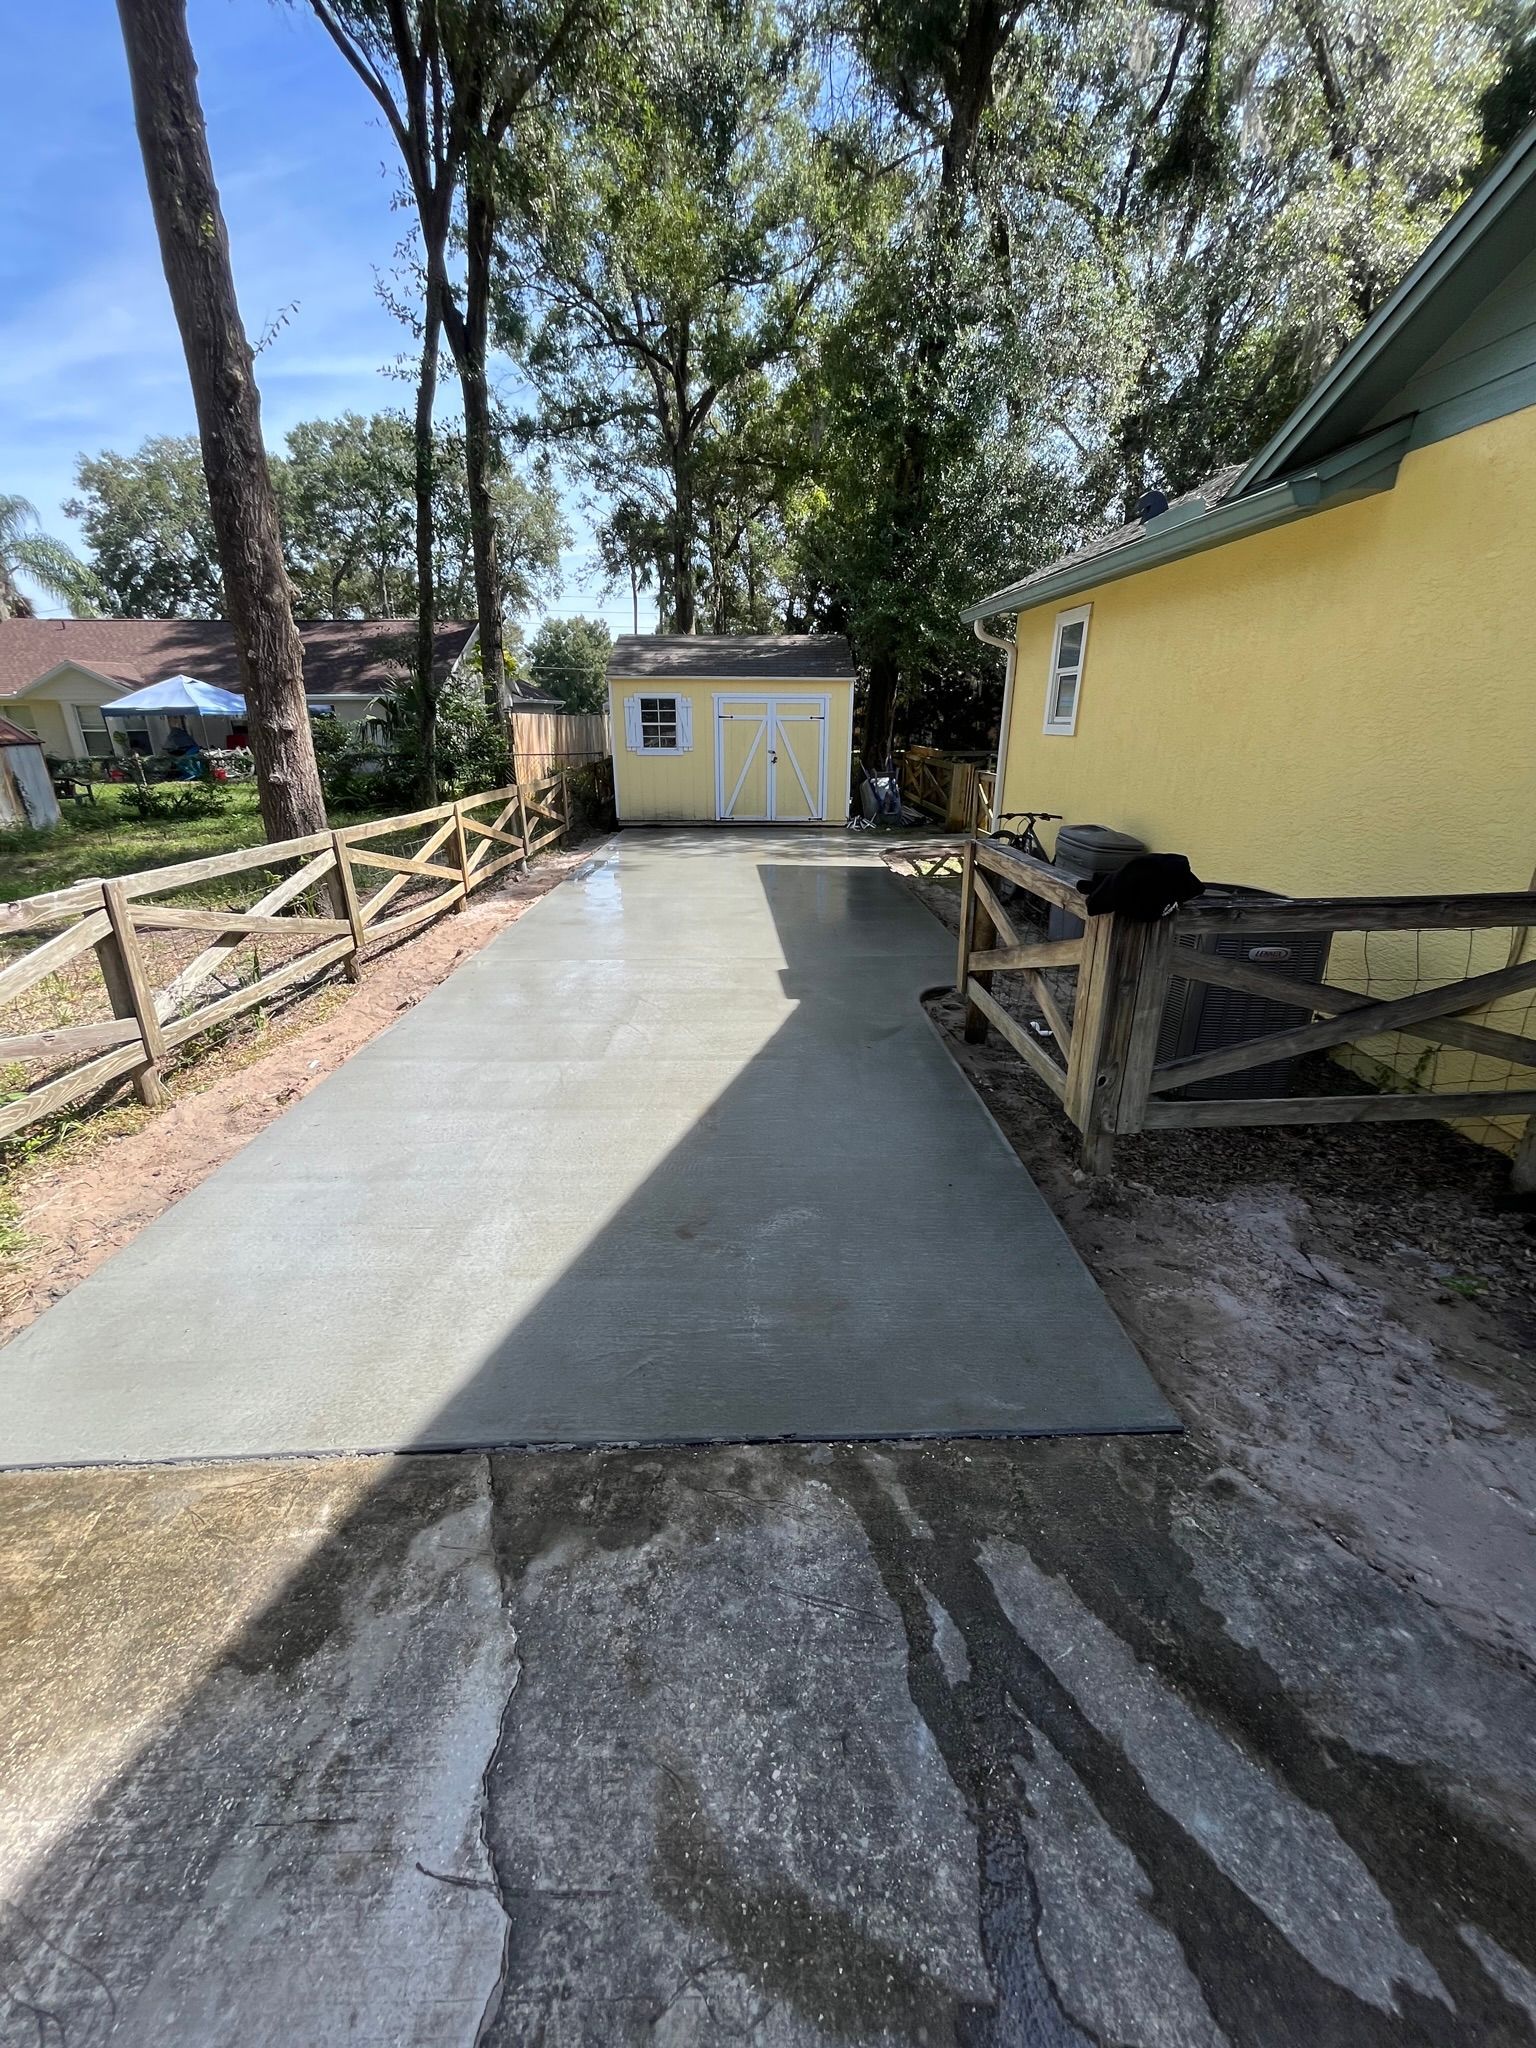 A concrete driveway leading to a yellow house with a wooden fence.